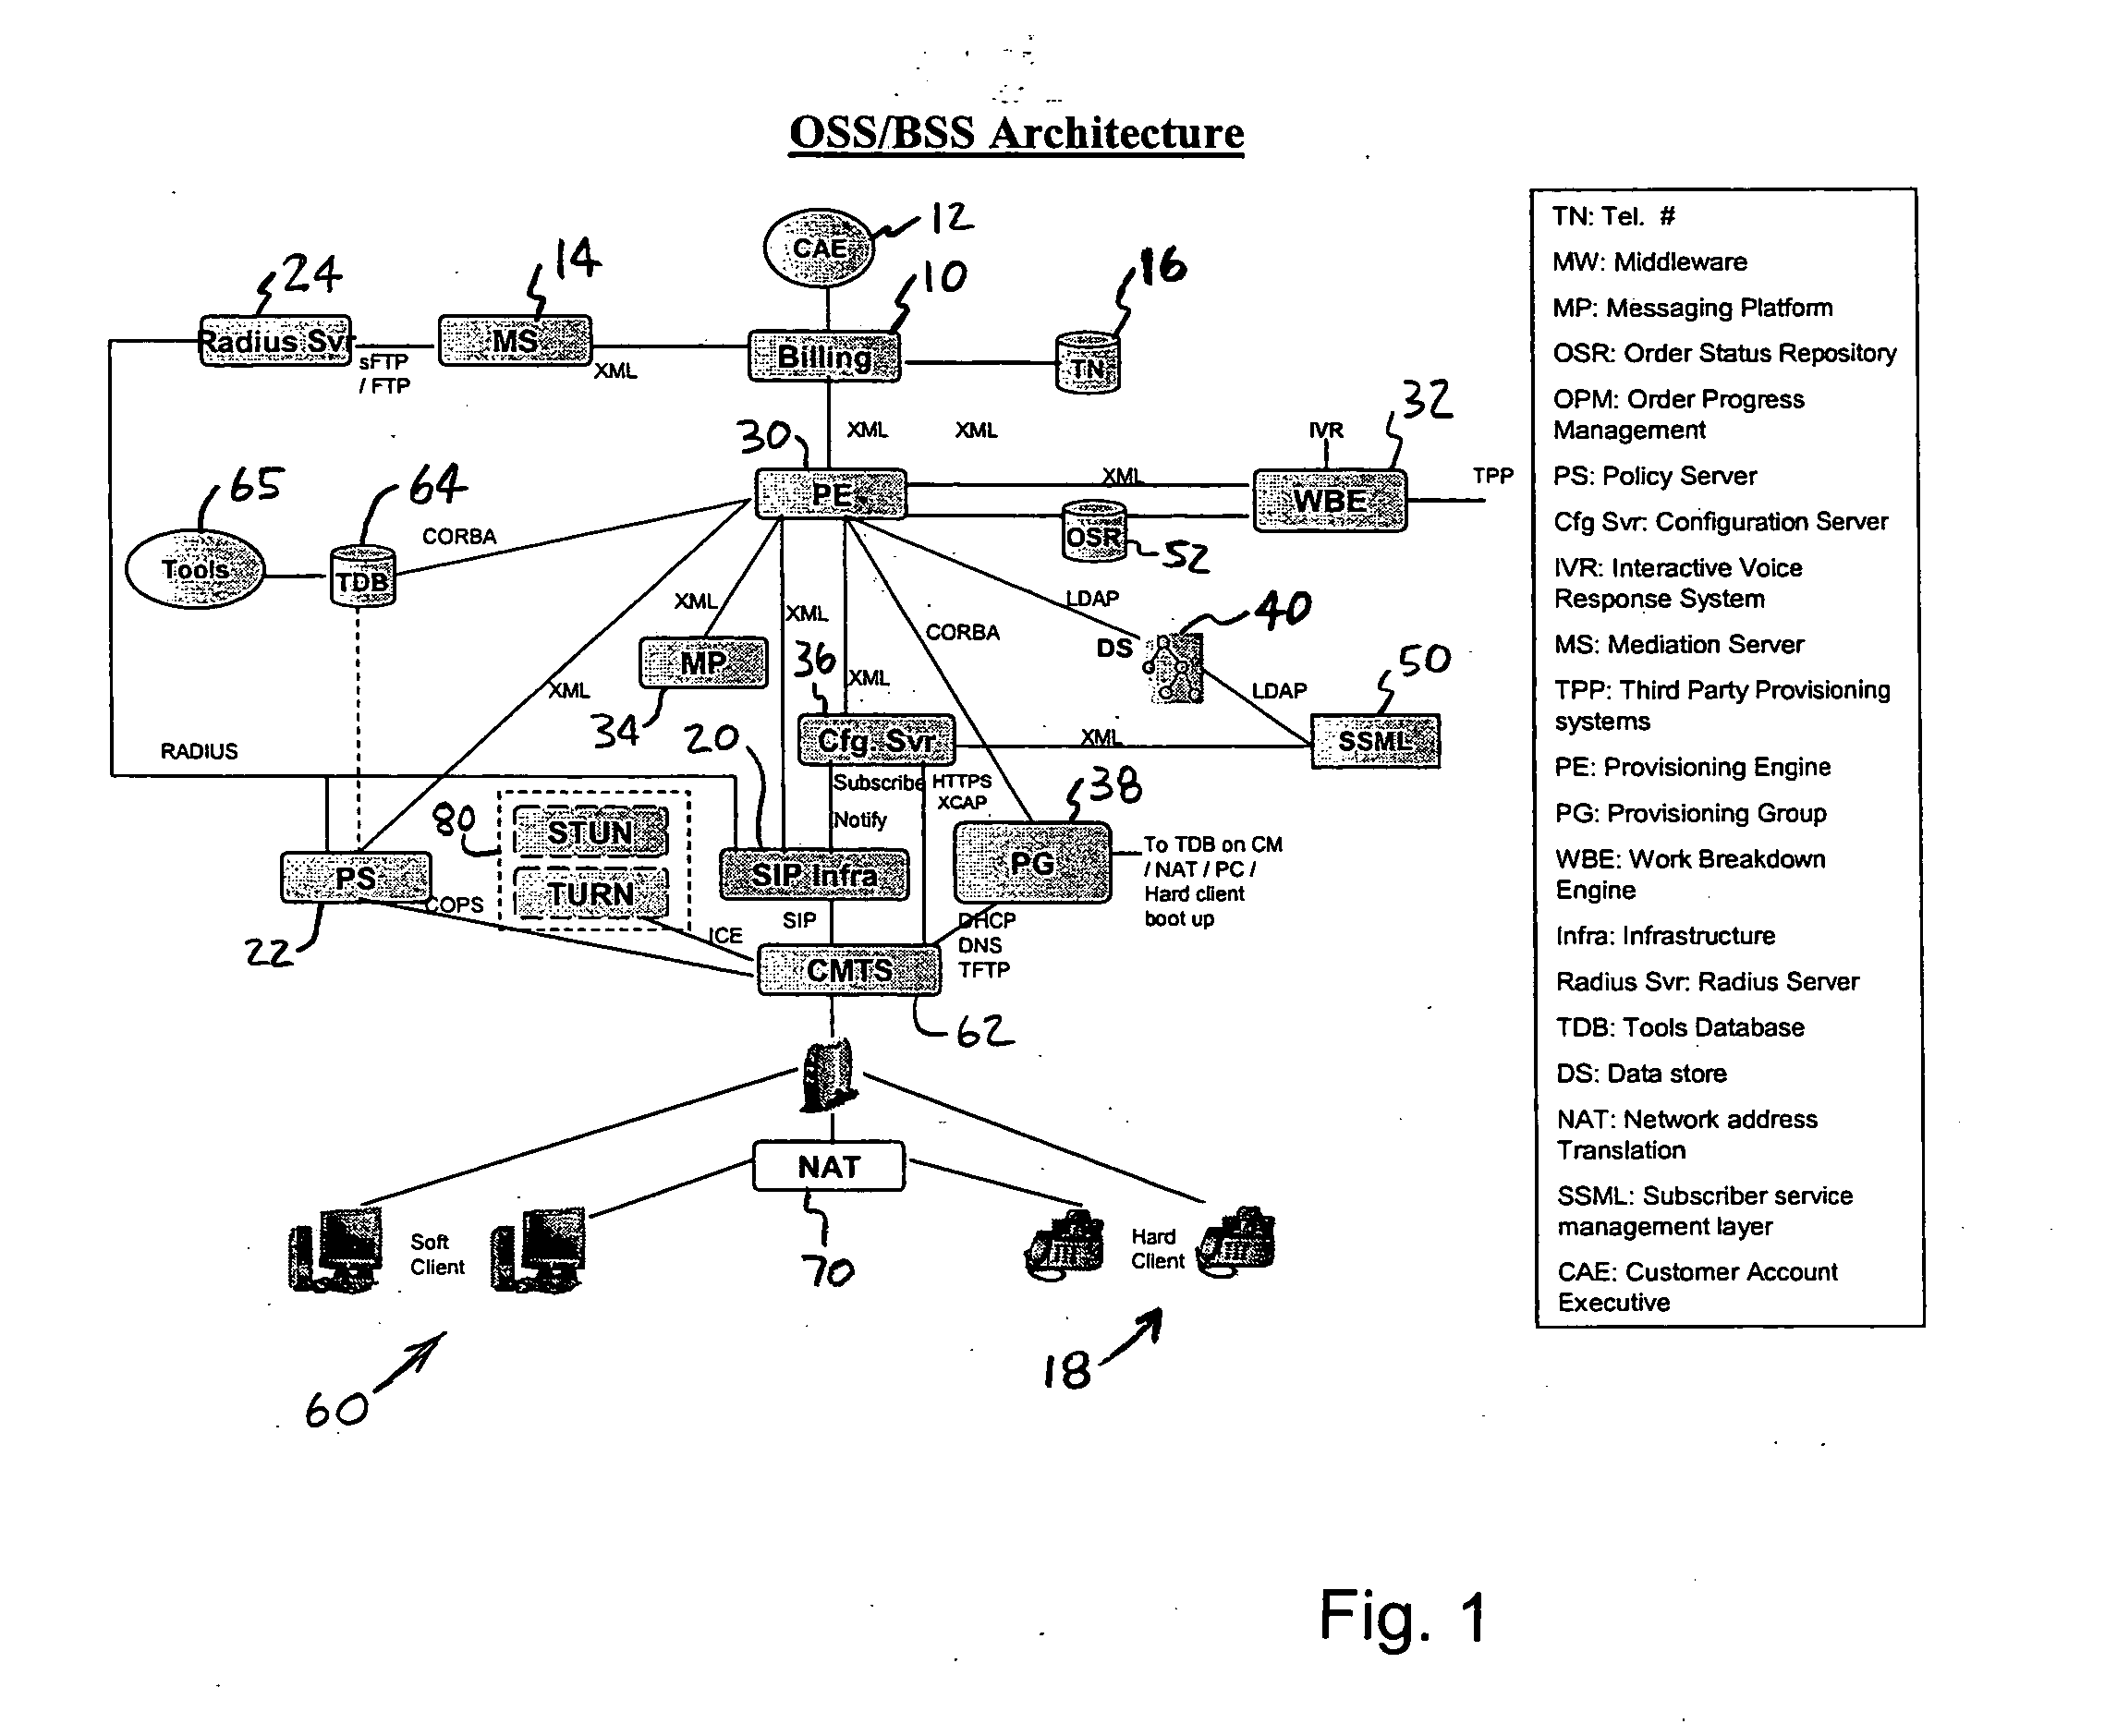 Method and system for booting, provisioning and activating hardware and software clients